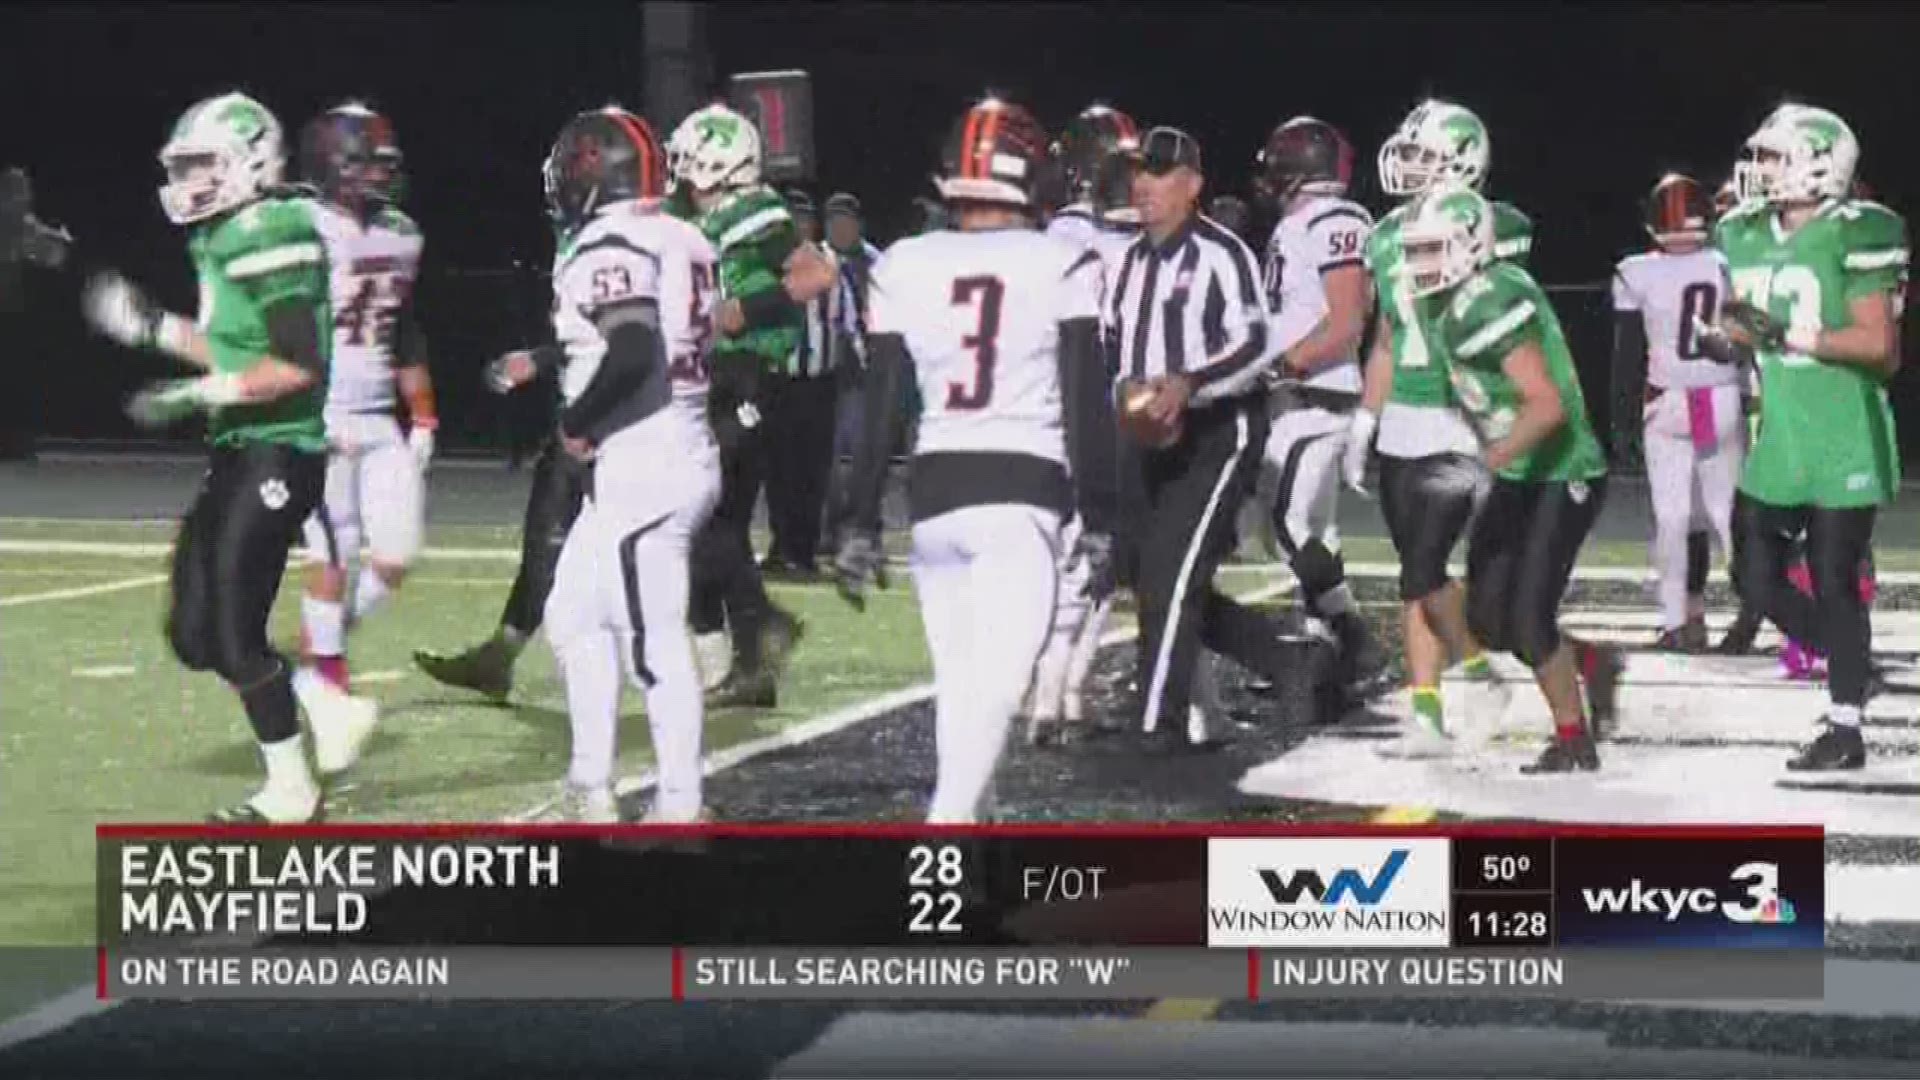 Channel 3's Week 9 Friday night high school football highlights featured Eastlake North's 28-22 road win at Mayfield.